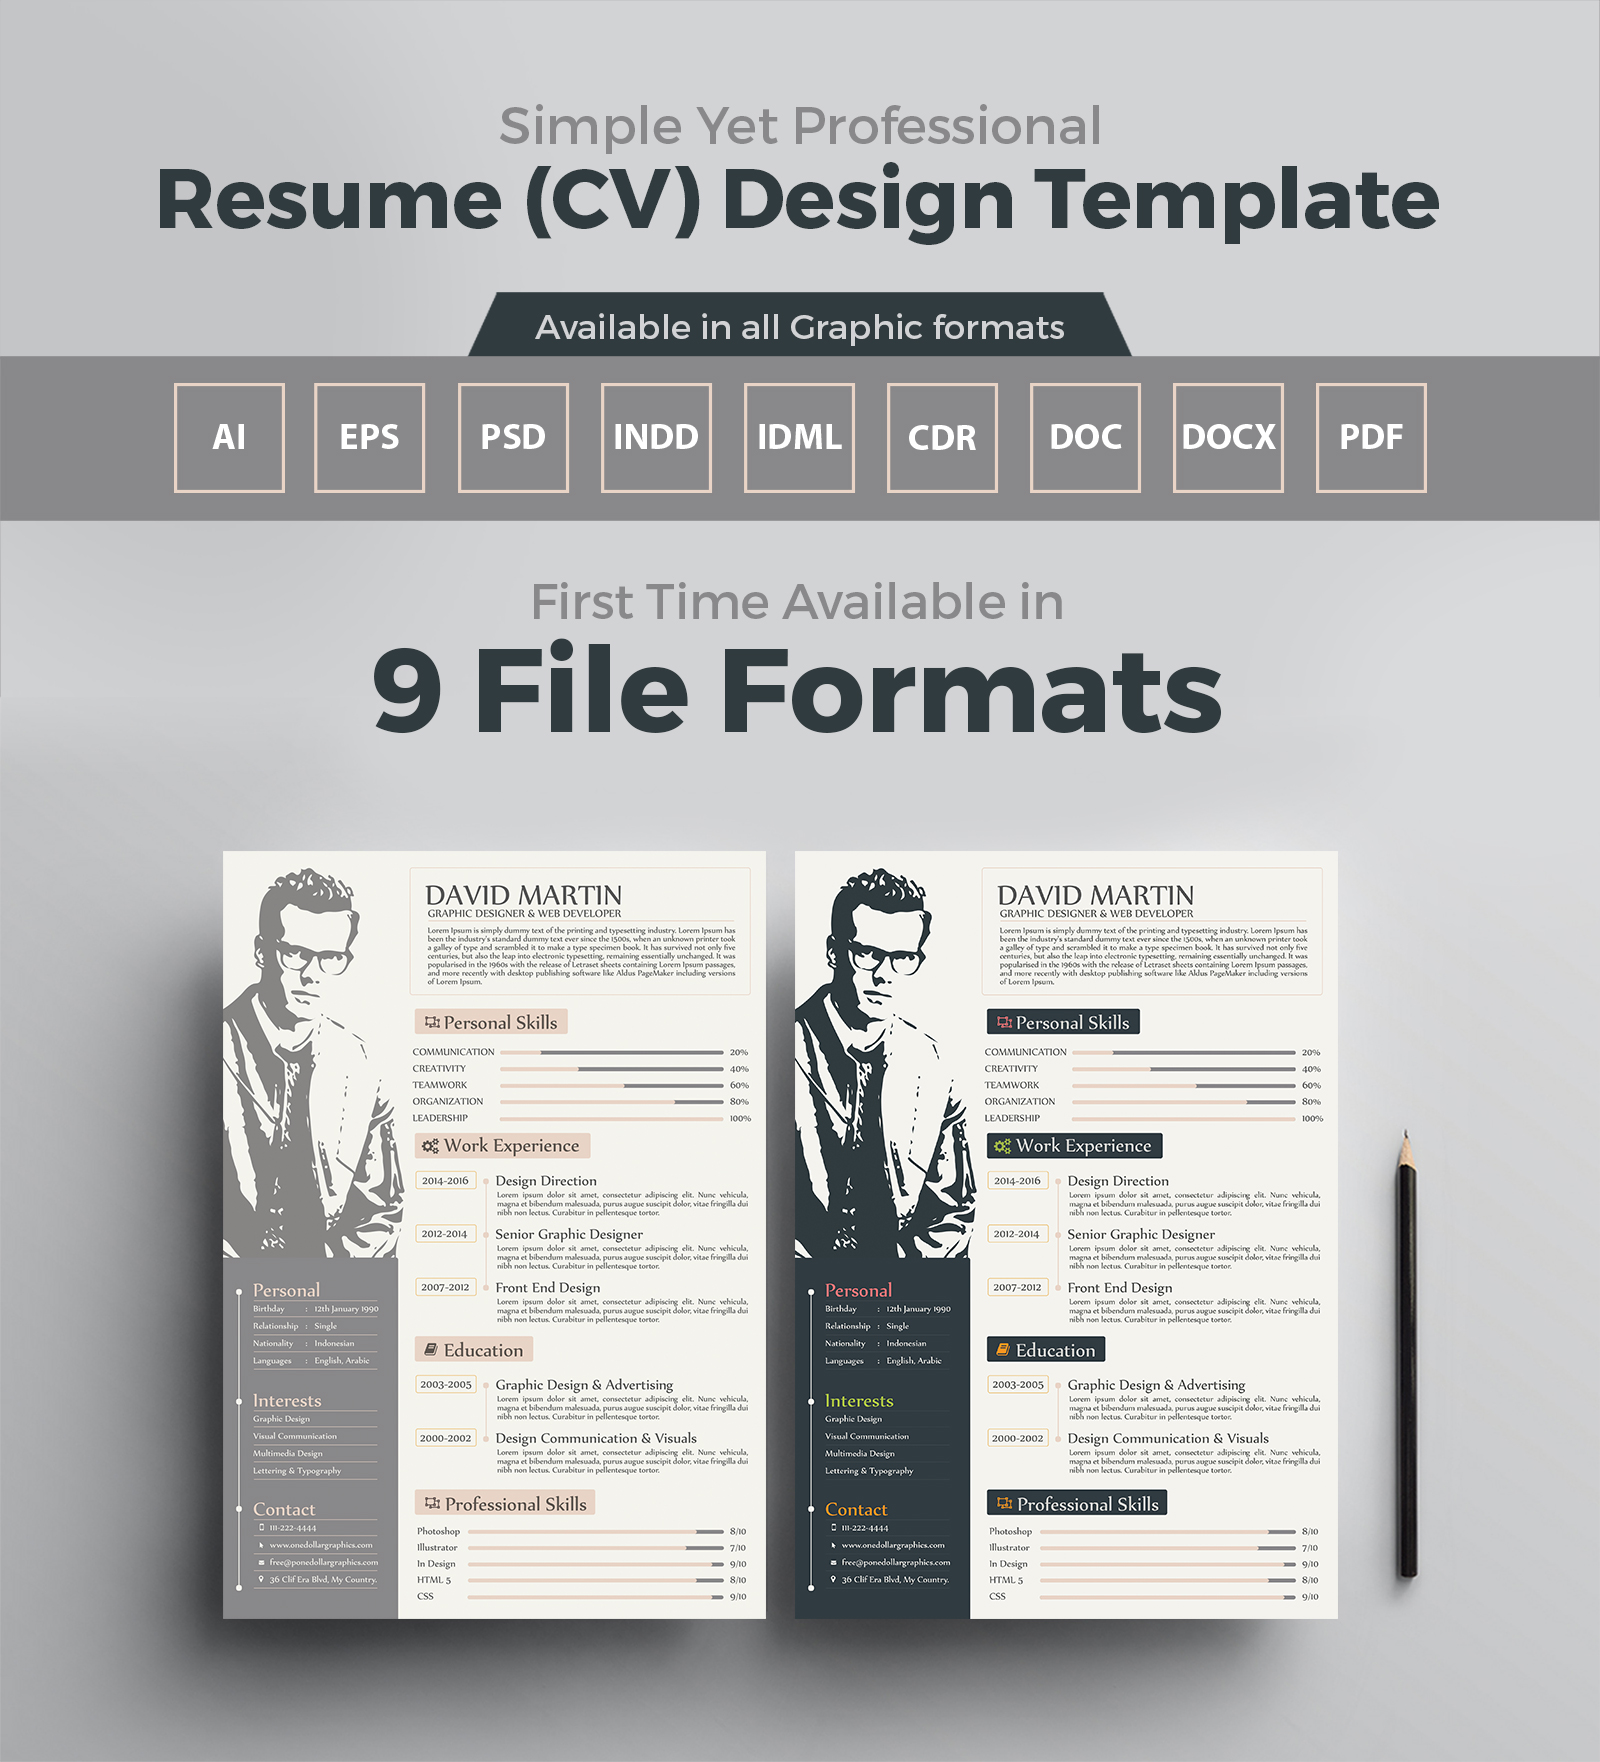 simple yet professional resume  cv  design templates in ai  eps  psd  pdf  cdr  doc  docx  indd